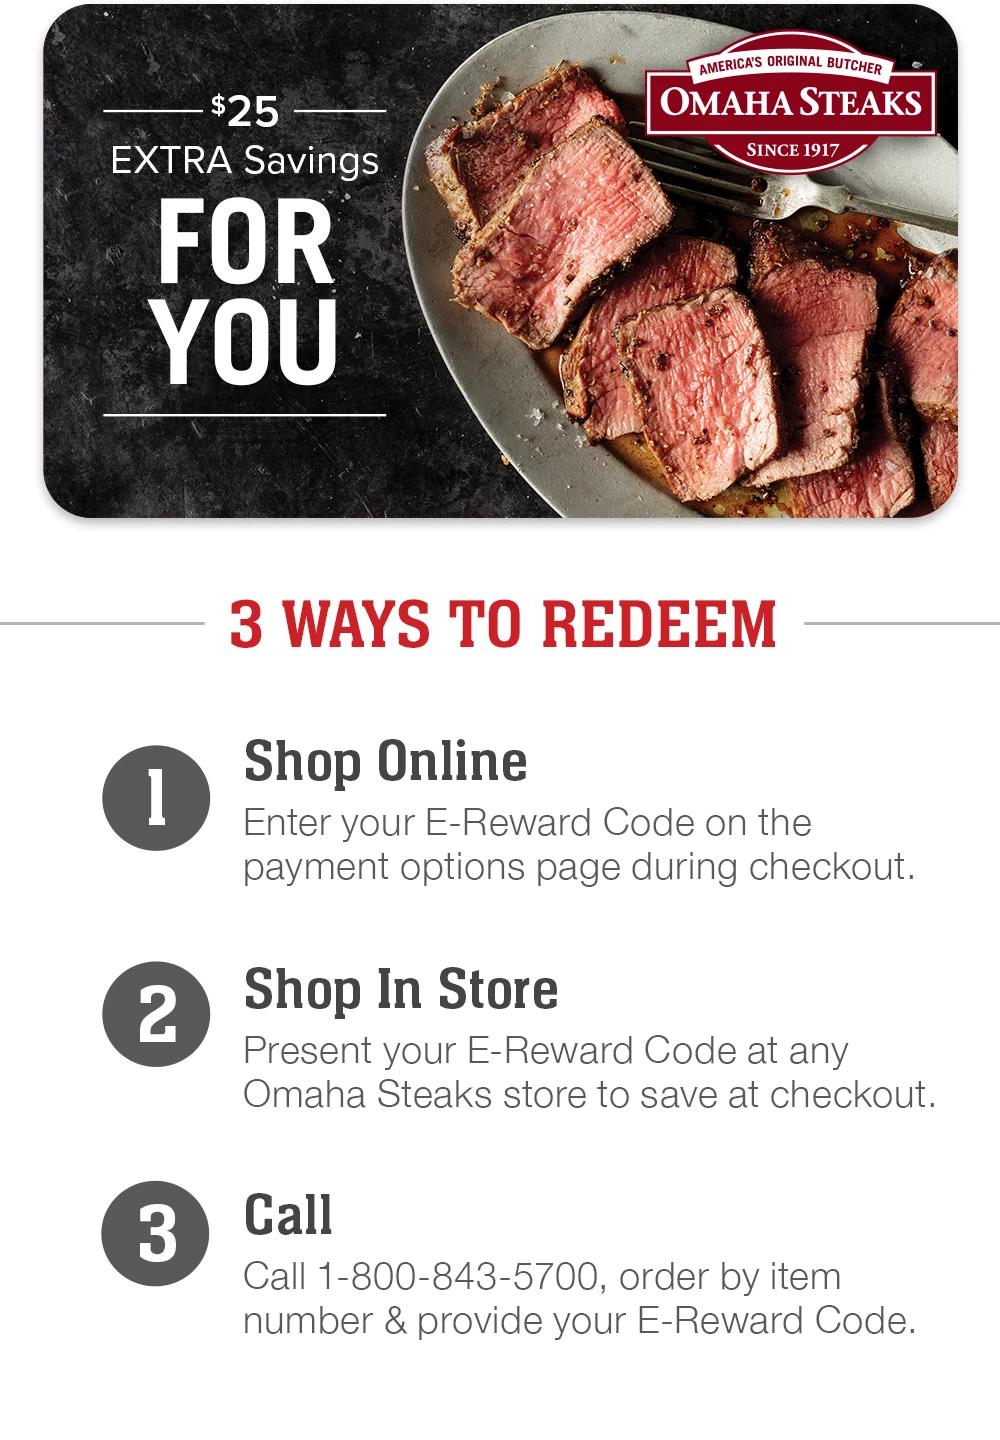 $25 EXTRA SAVINGS FOR YOU - 3 Ways to redeem | 1. Shop Online - Enter your E-Reward Code on the payment options page during checkout. 2. Shop In Store - Present your E-Reward Code at any Omaha Steaks store to save at checkout. 3. Call - Call 1-800-843-5700, order by item number & provide your E-Reward Code.